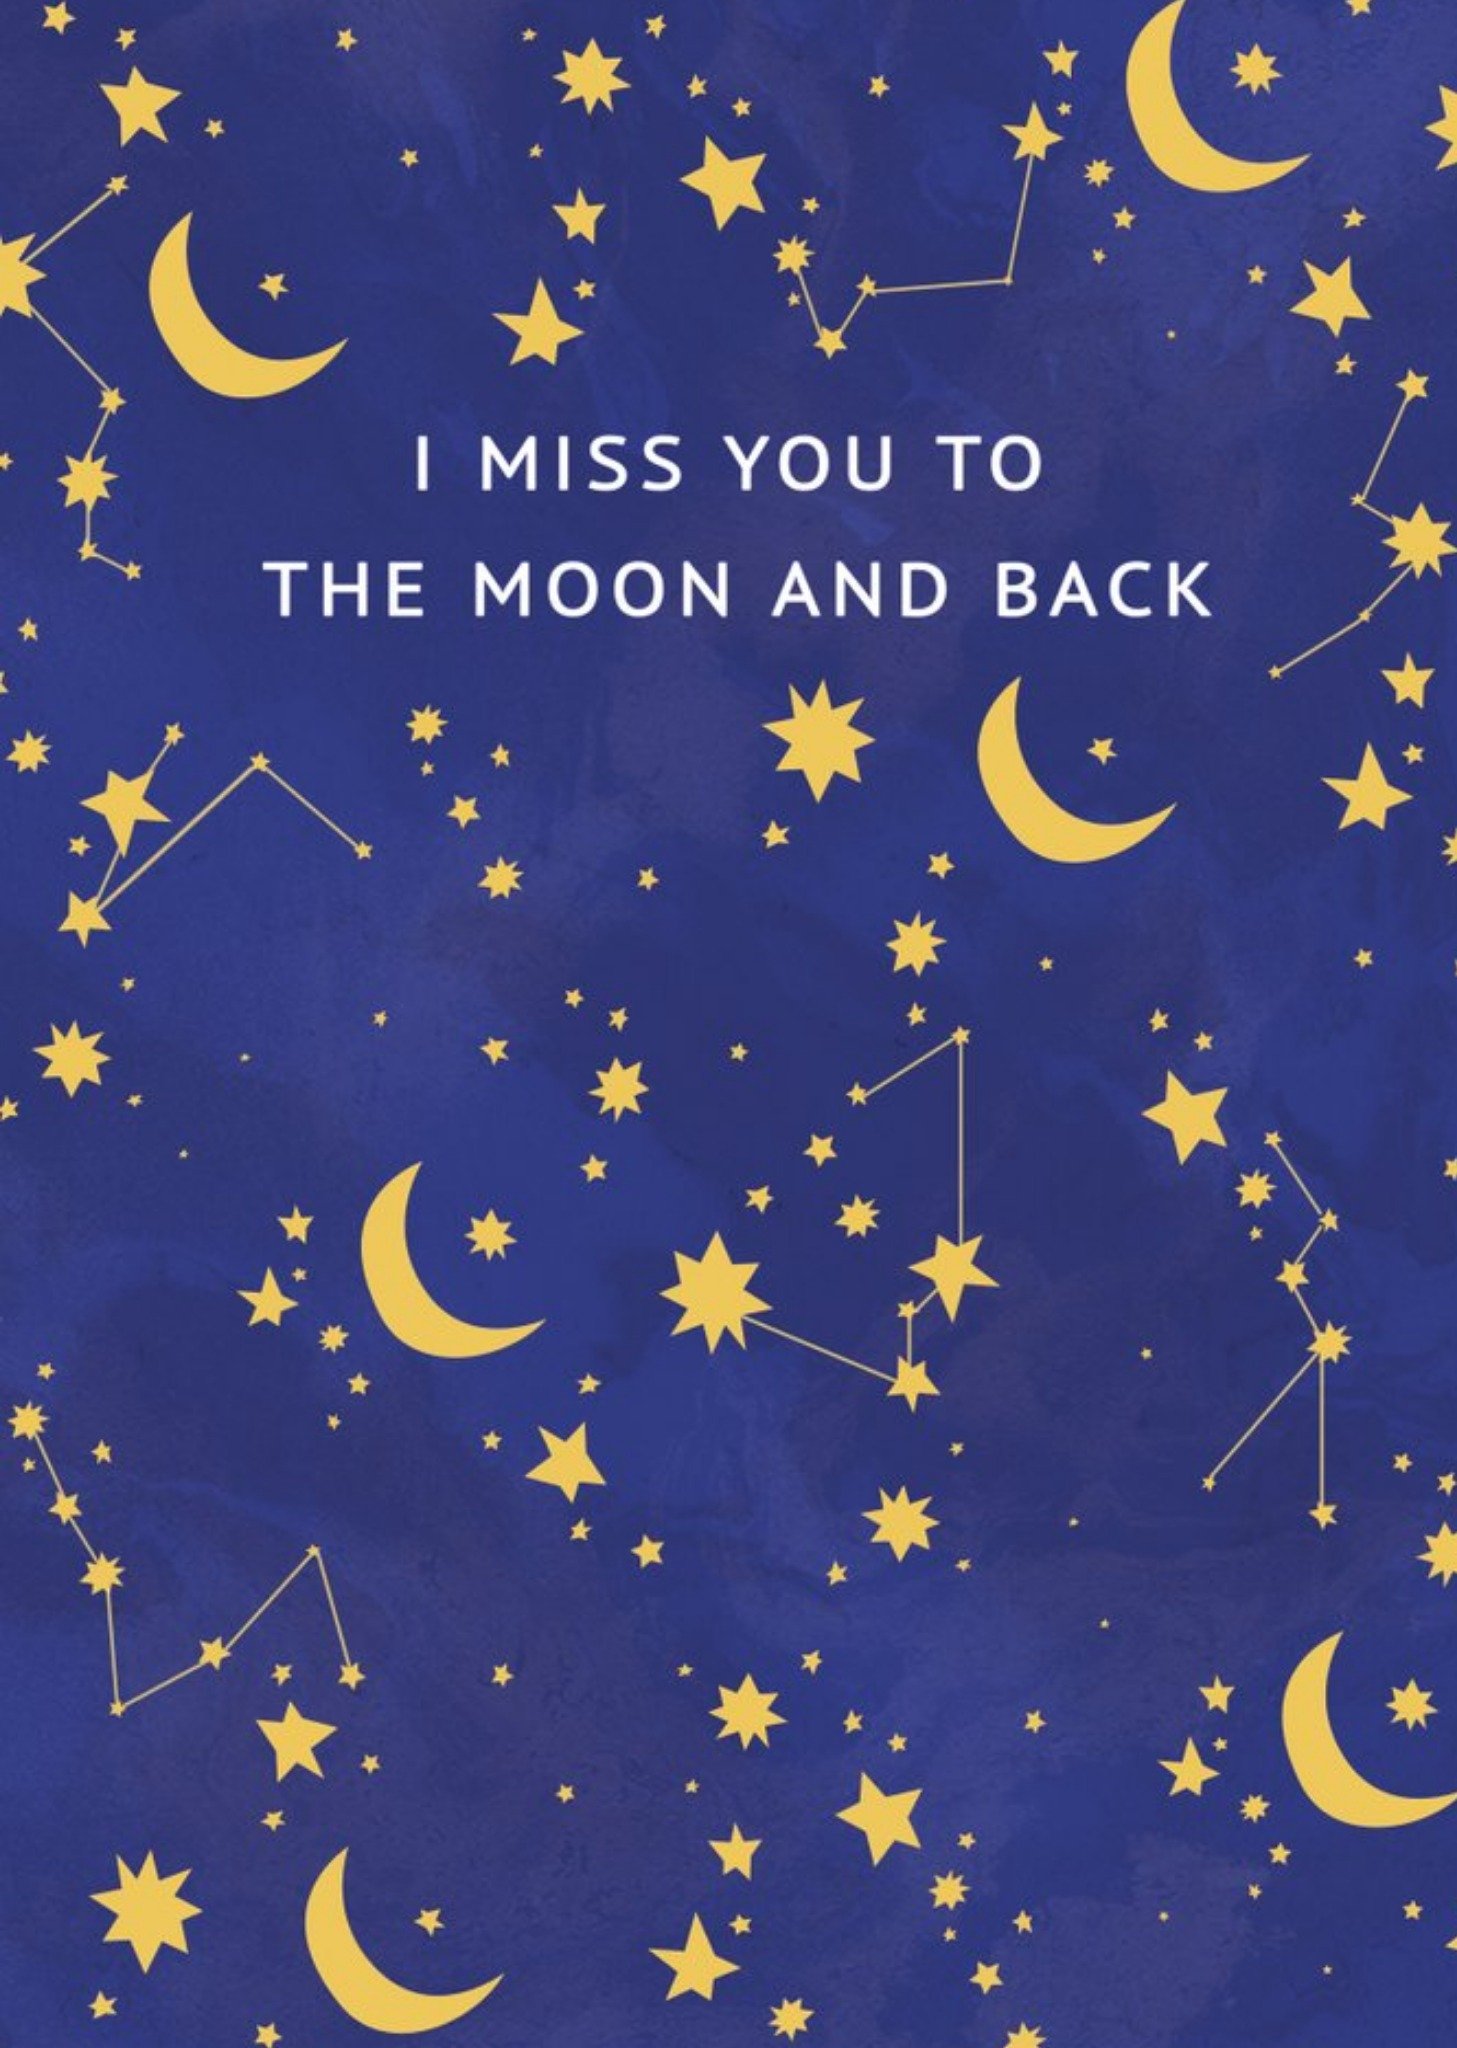 Moonpig Clintons Illustrated Constellation Missing You Card Ecard